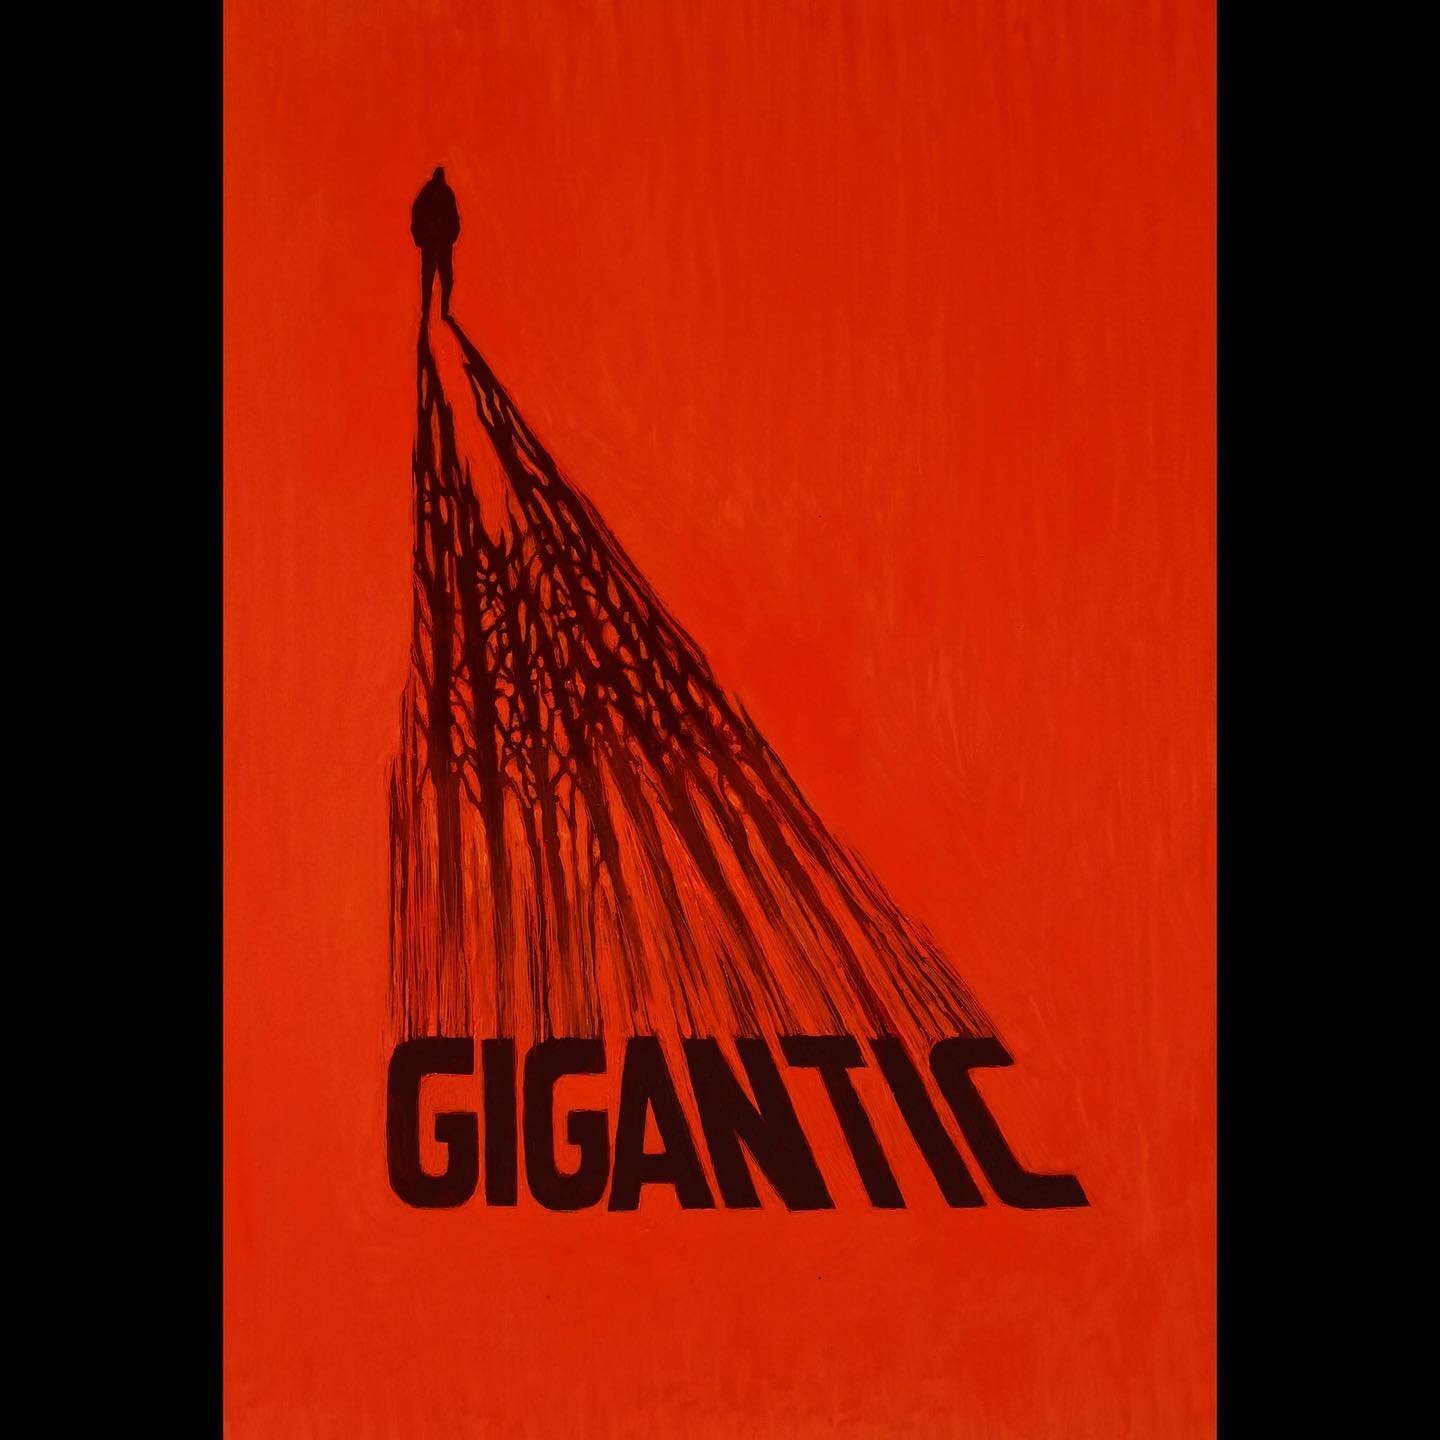 New article is up! This time we&rsquo;re celebrating the release of GIGANTIC, a riveting new novel by author @ashley.j.stokes by taking a closer look at the bold new artwork created by @nicolas_ruston that adorns its cover. 
.
Click the link in our b